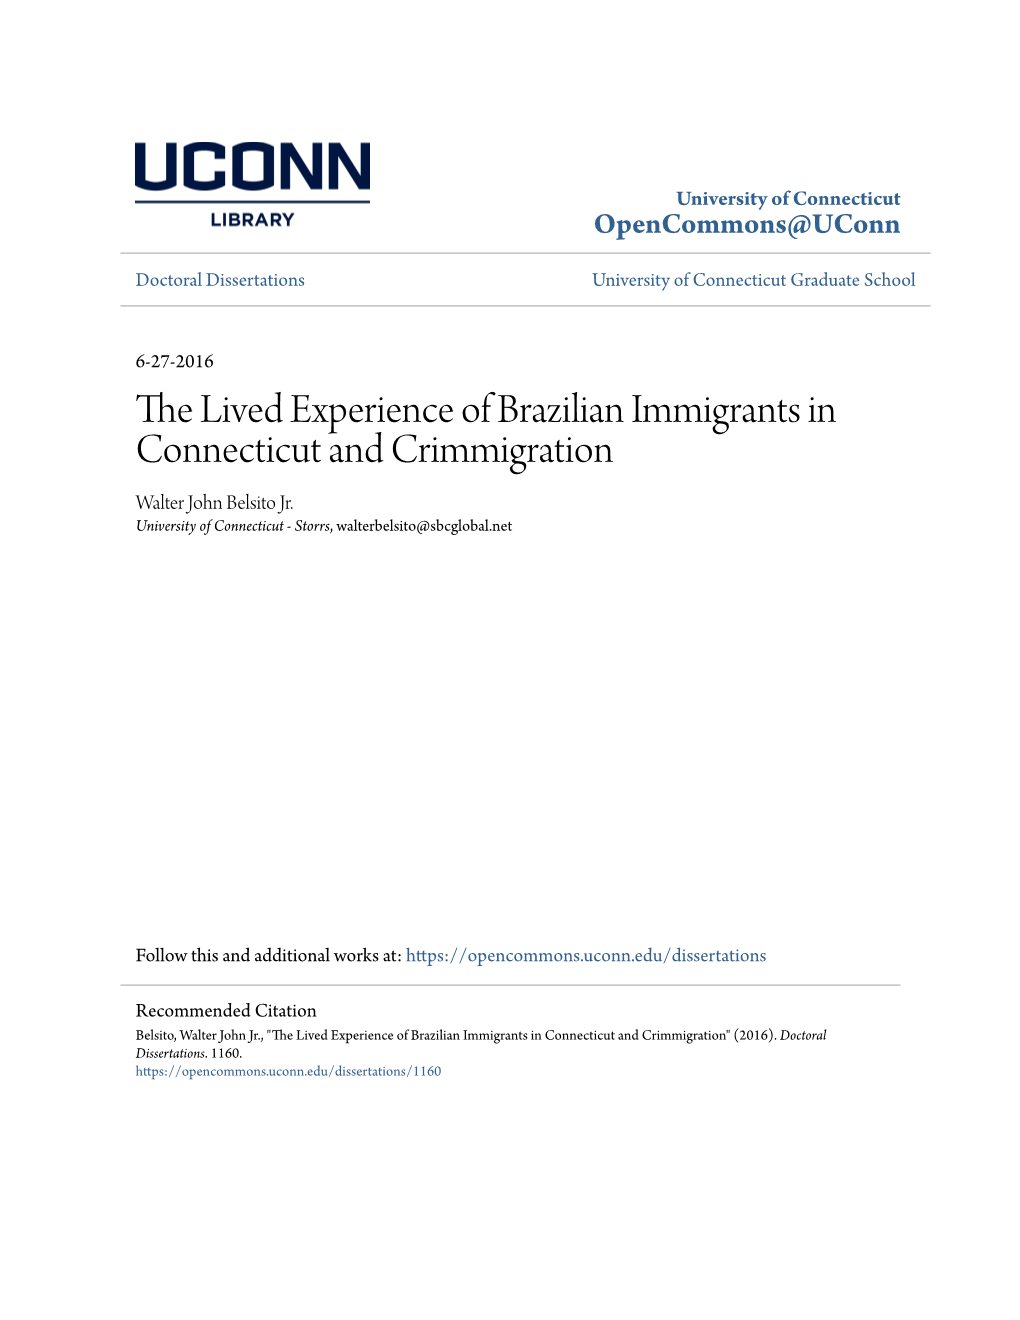 The Lived Experience of Brazilian Immigrants in Connecticut and Crimmigration Walter John Belsito Jr